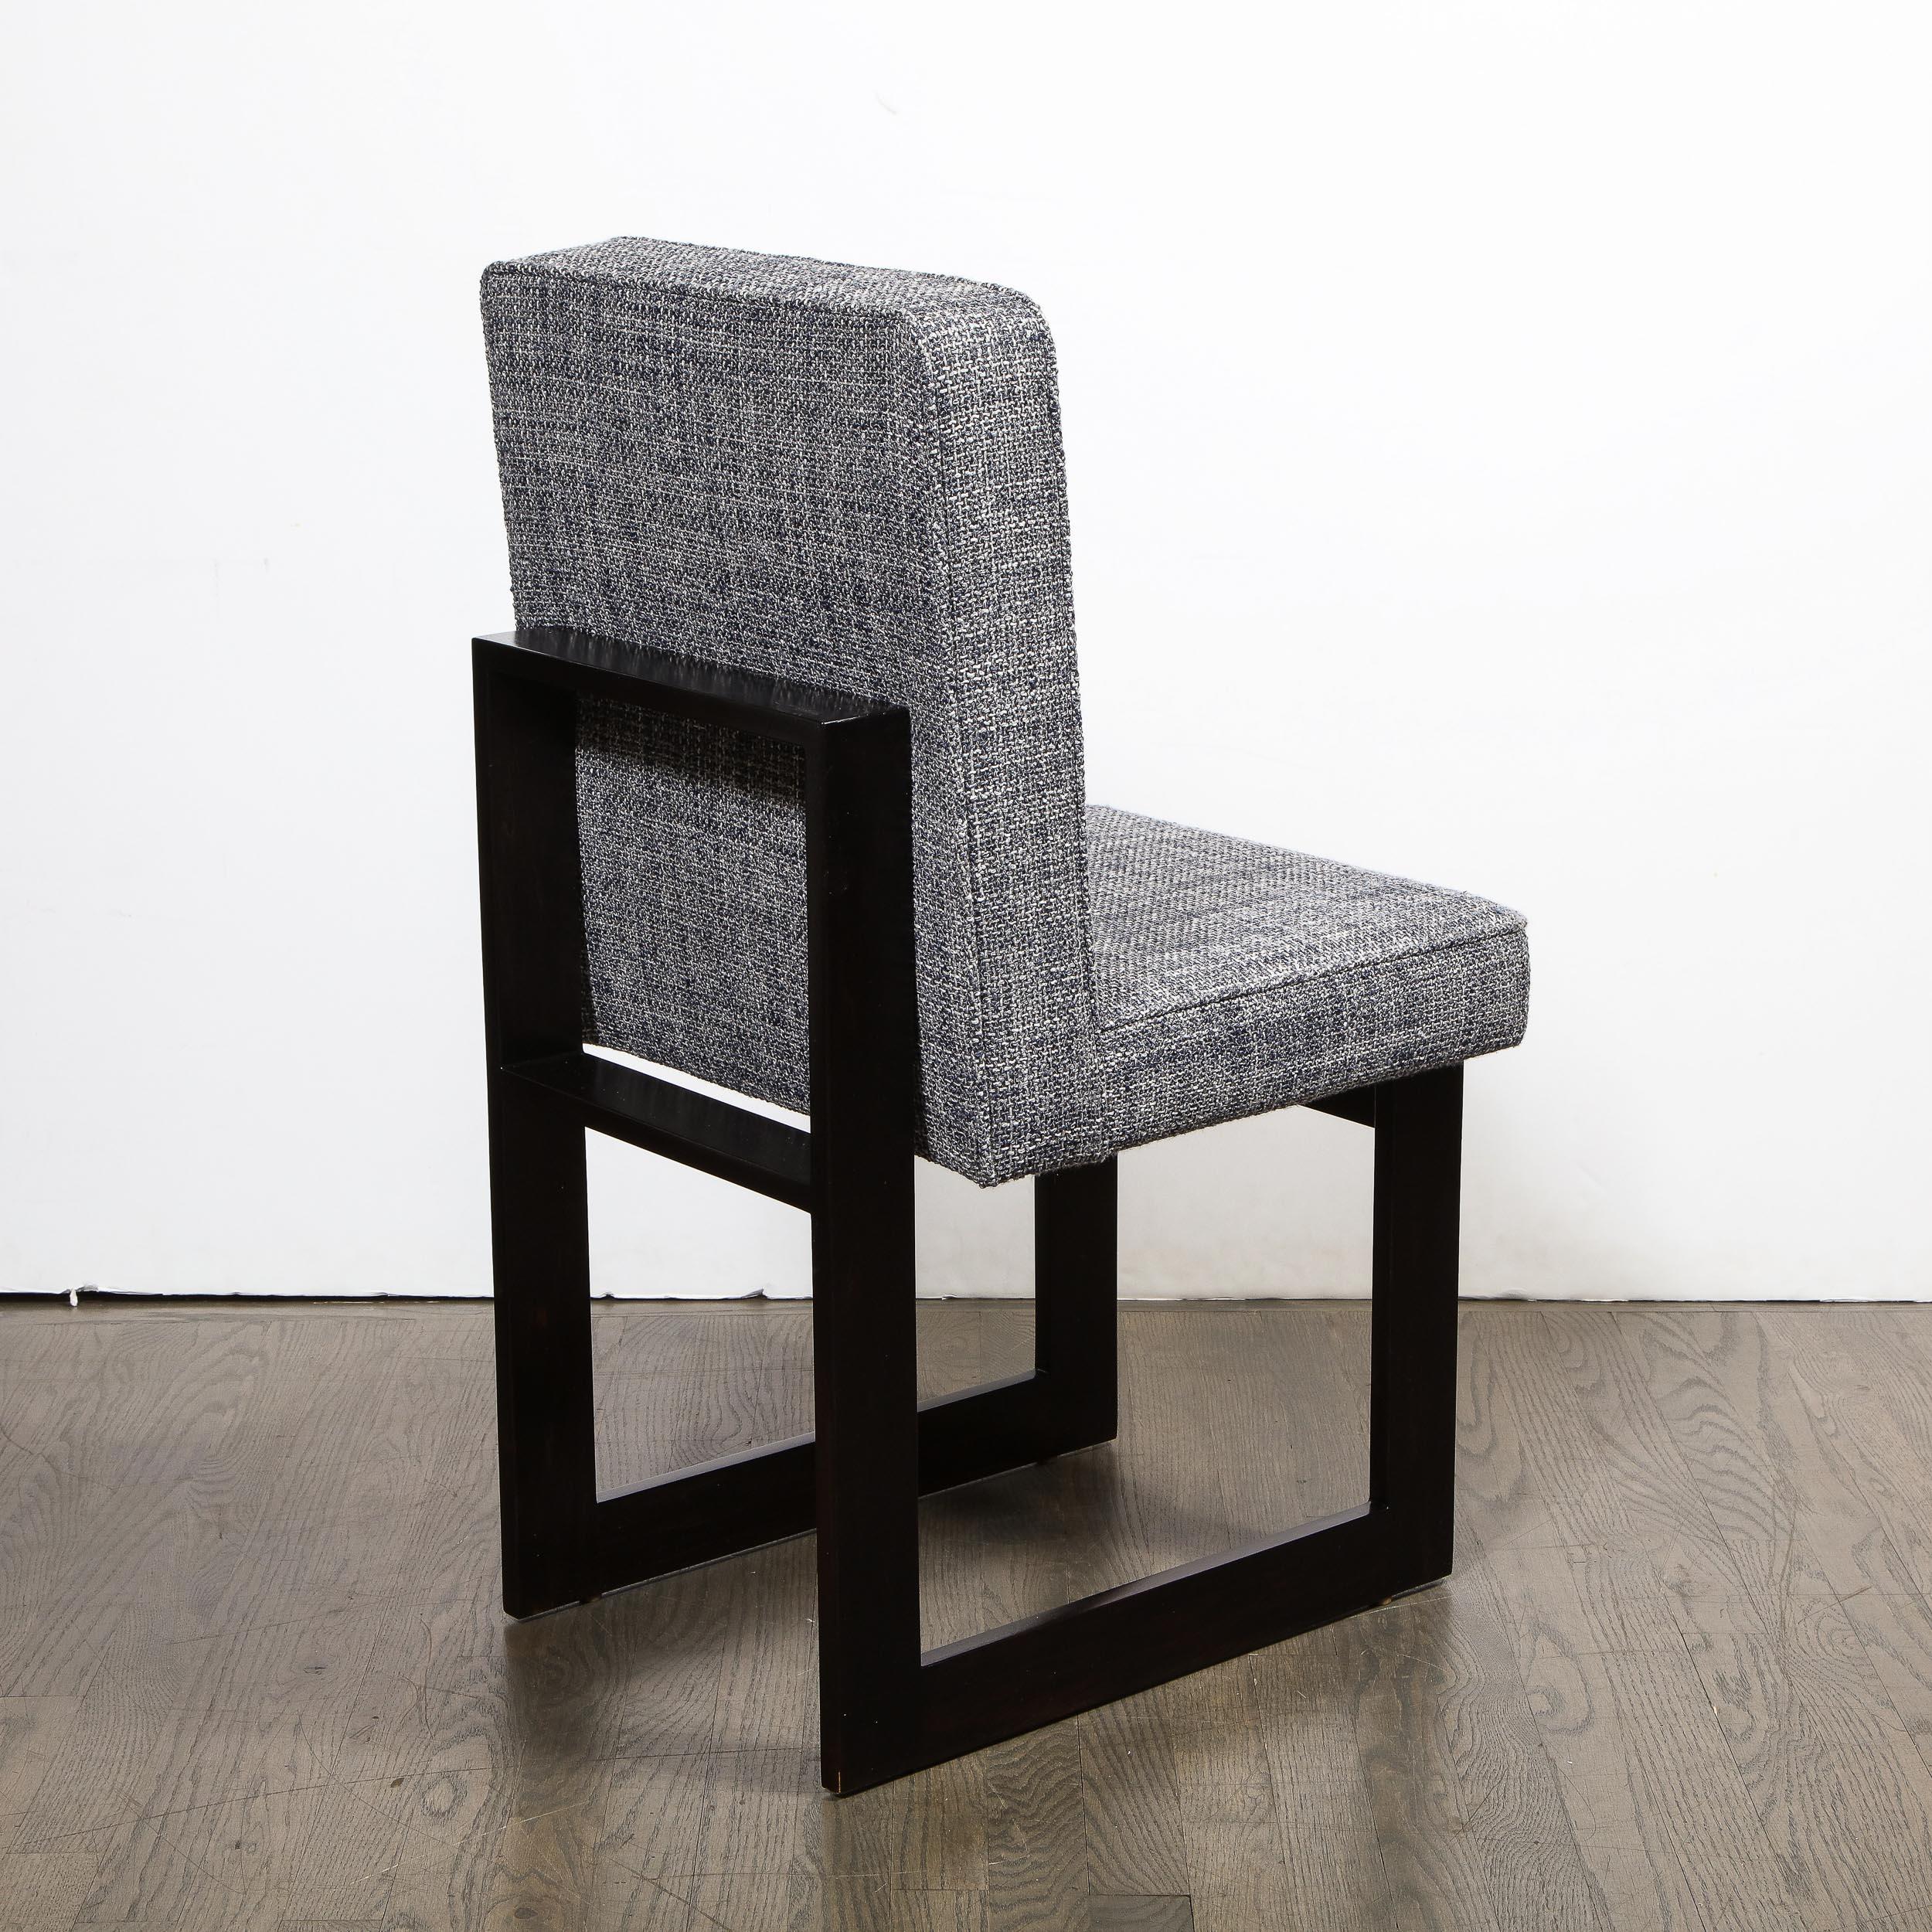 Modernist Rectilinear Ebonized Walnut and Textural Gray Woven Fabric Side Chair For Sale 2